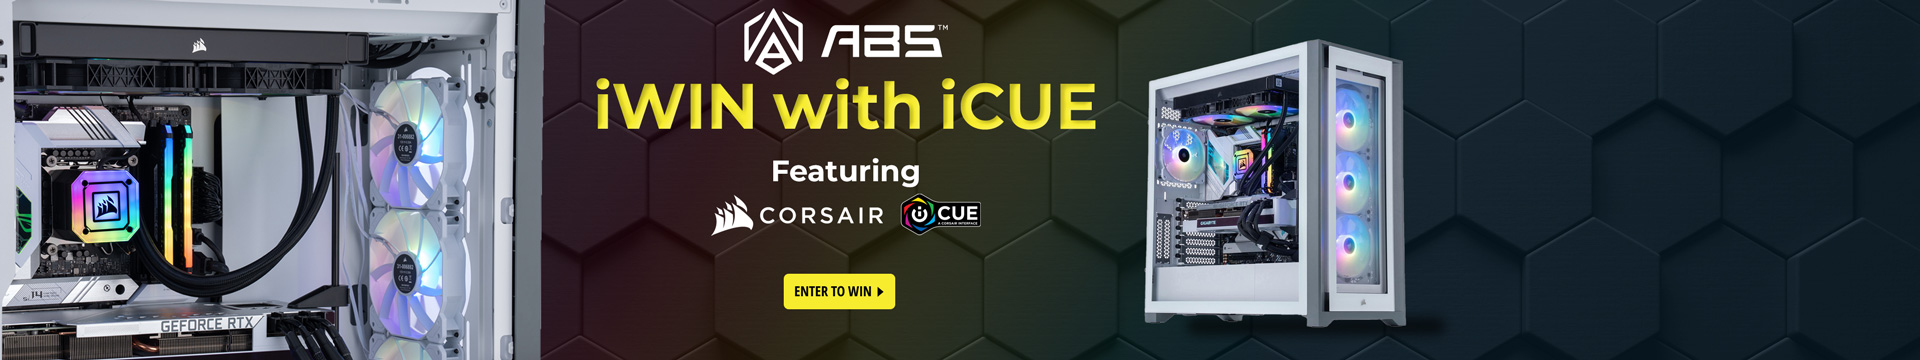 ABS/iWIN with iCUE